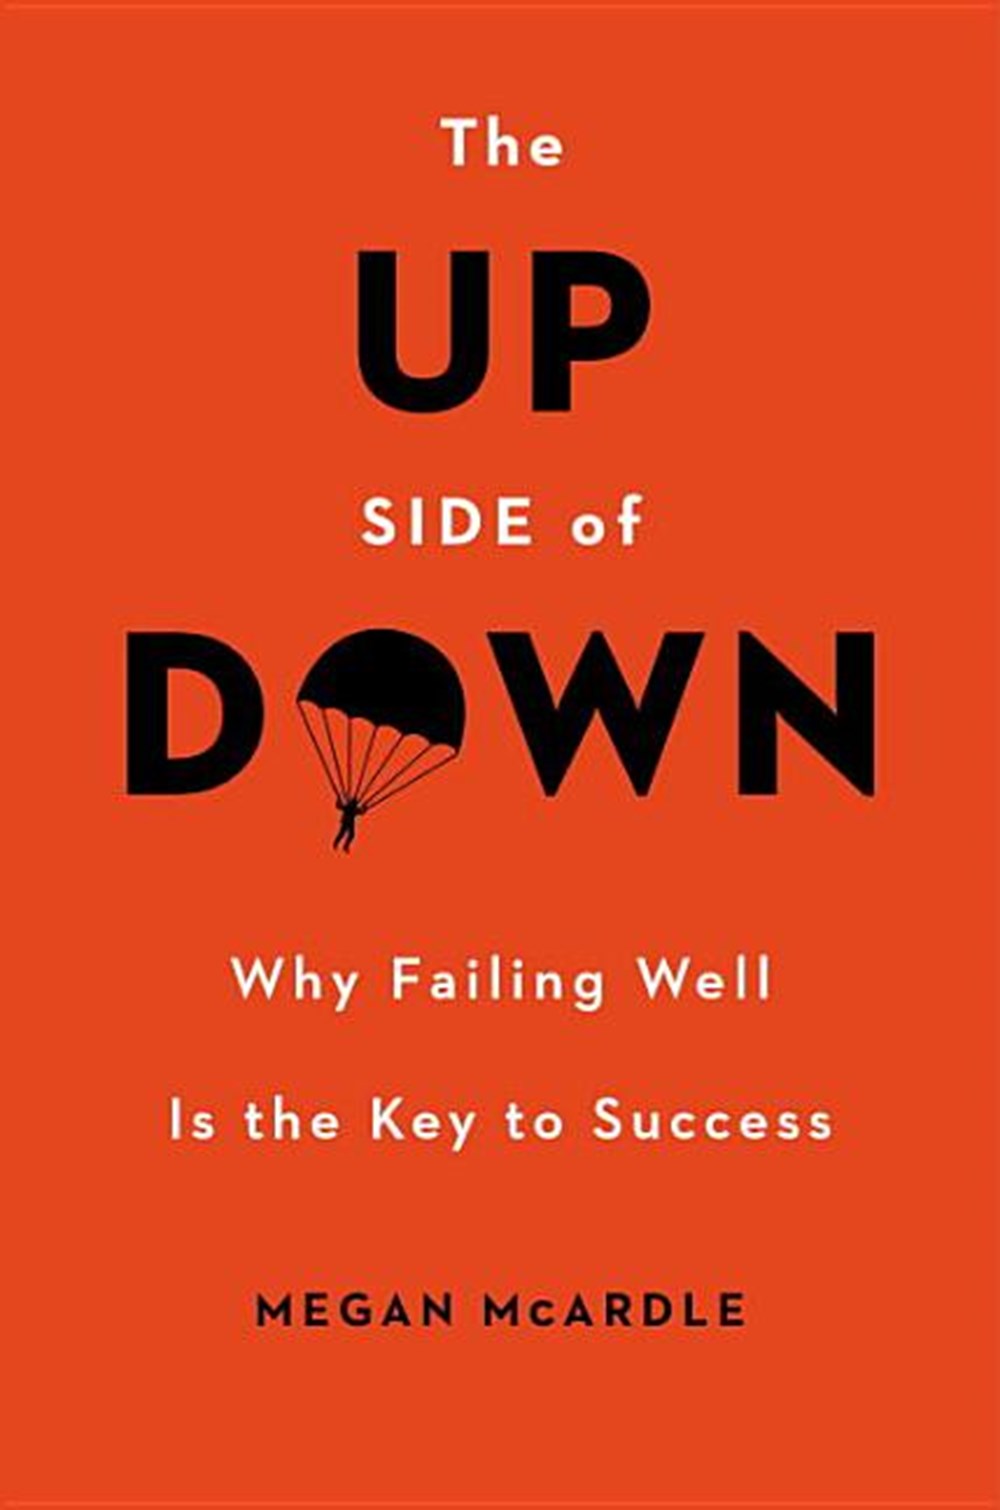 Up Side of Down: Why Failing Well Is the Key to Success